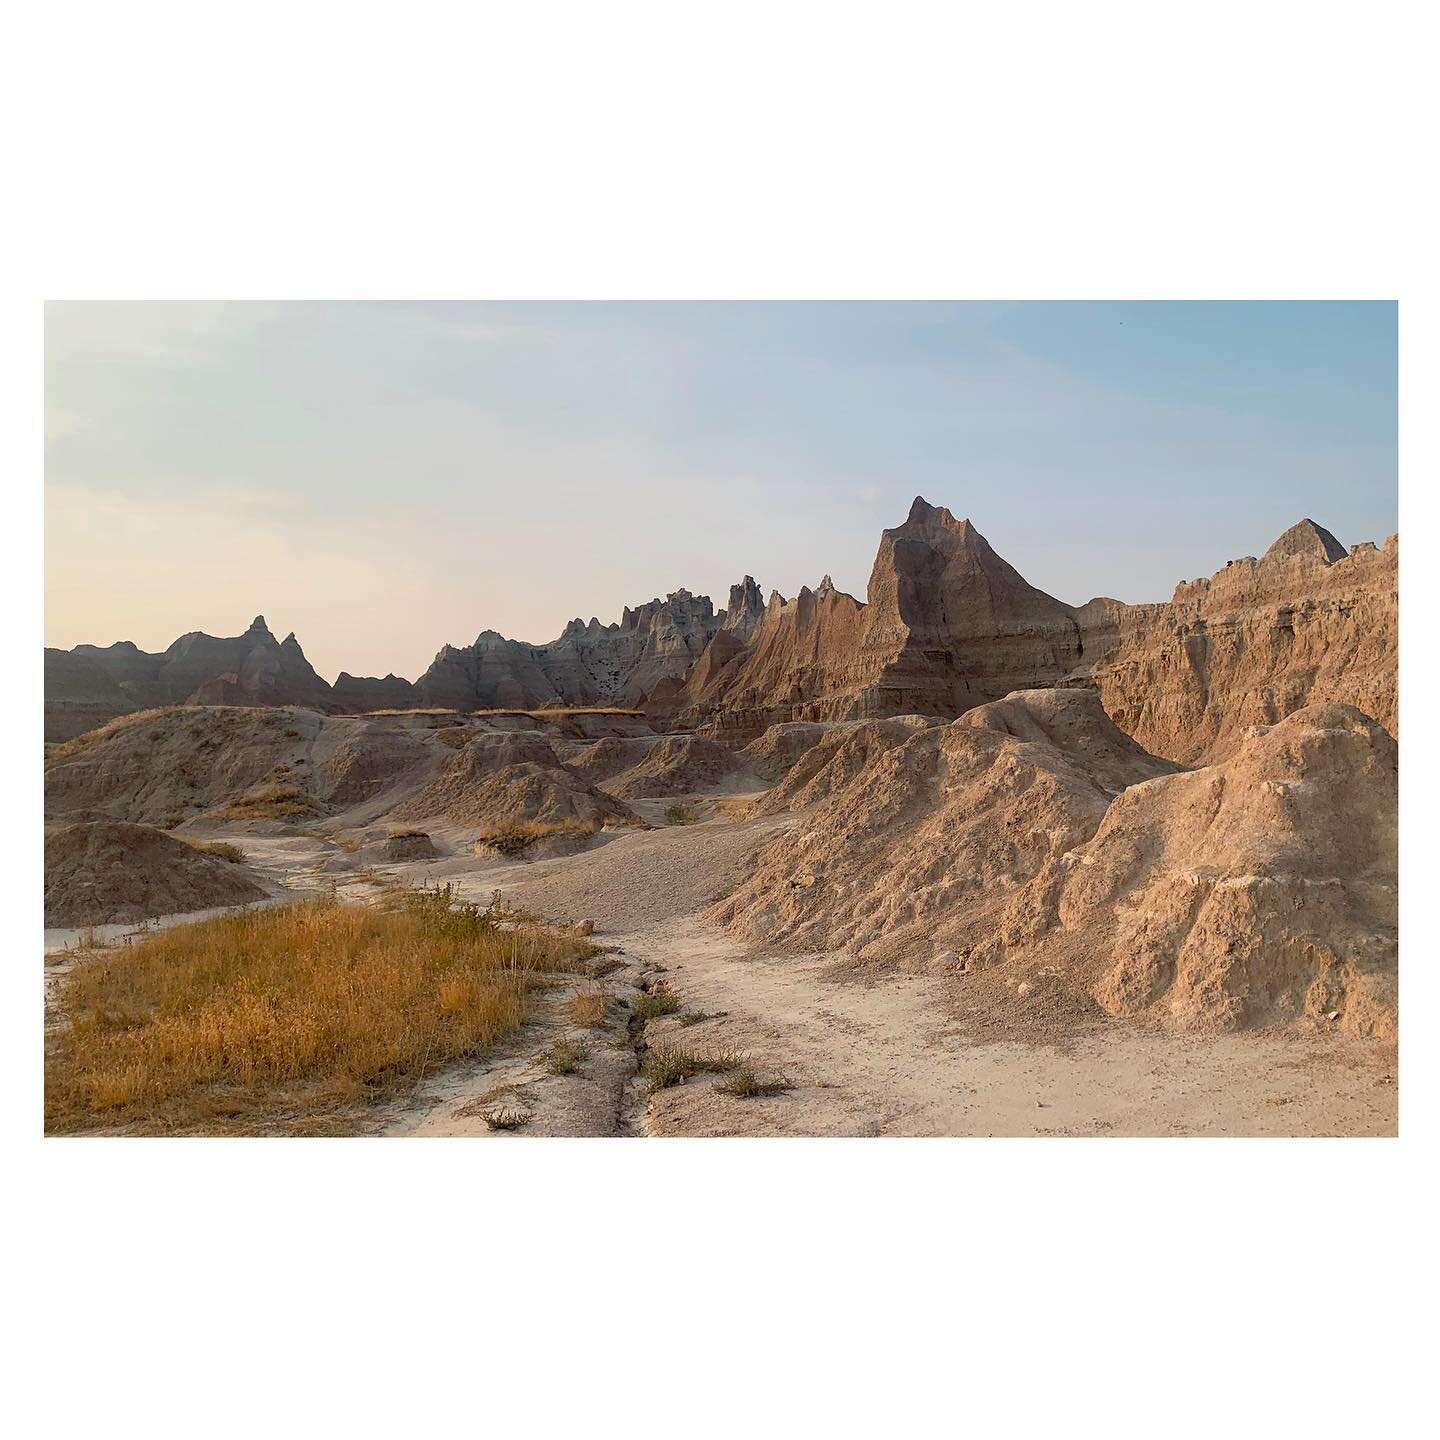 The Badlands
💥
For 11,000 years, Native Americans have lived in the Badlands. Today, the park it co-managed with the Oglala Lakota Tribe.
☀️
It is eerily quiet, and unbelievable. You should go.
South Dakota, Summer 2020